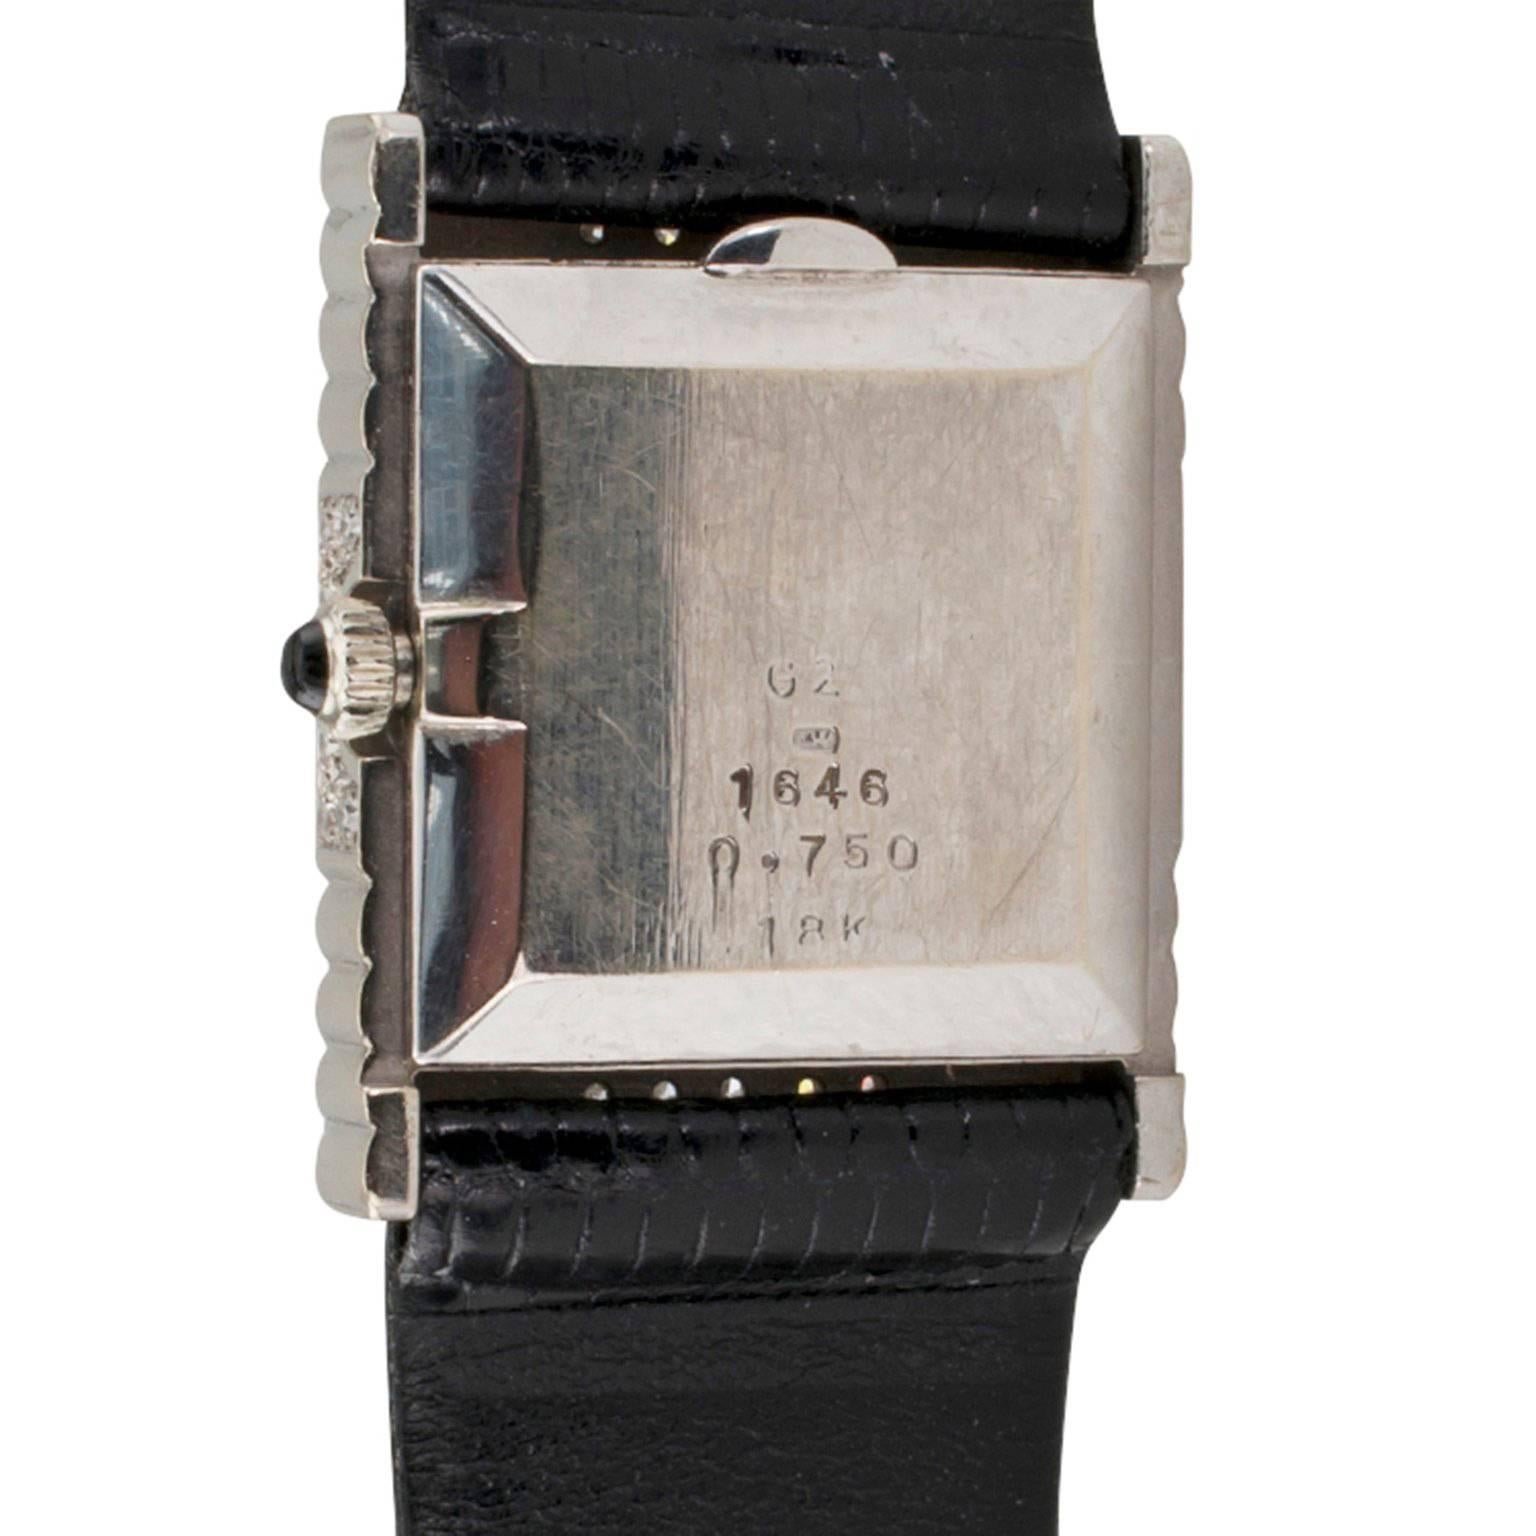 DeLaneau White Gold Diamond Tuxedo Wristwatch

DeLaneau 18-karat white gold and diamond tuxedo wristwatch circa 1970.  The geometric rectangular designed case is pave set with diamonds totaling approximately 1.00 carat, and the square black dial is